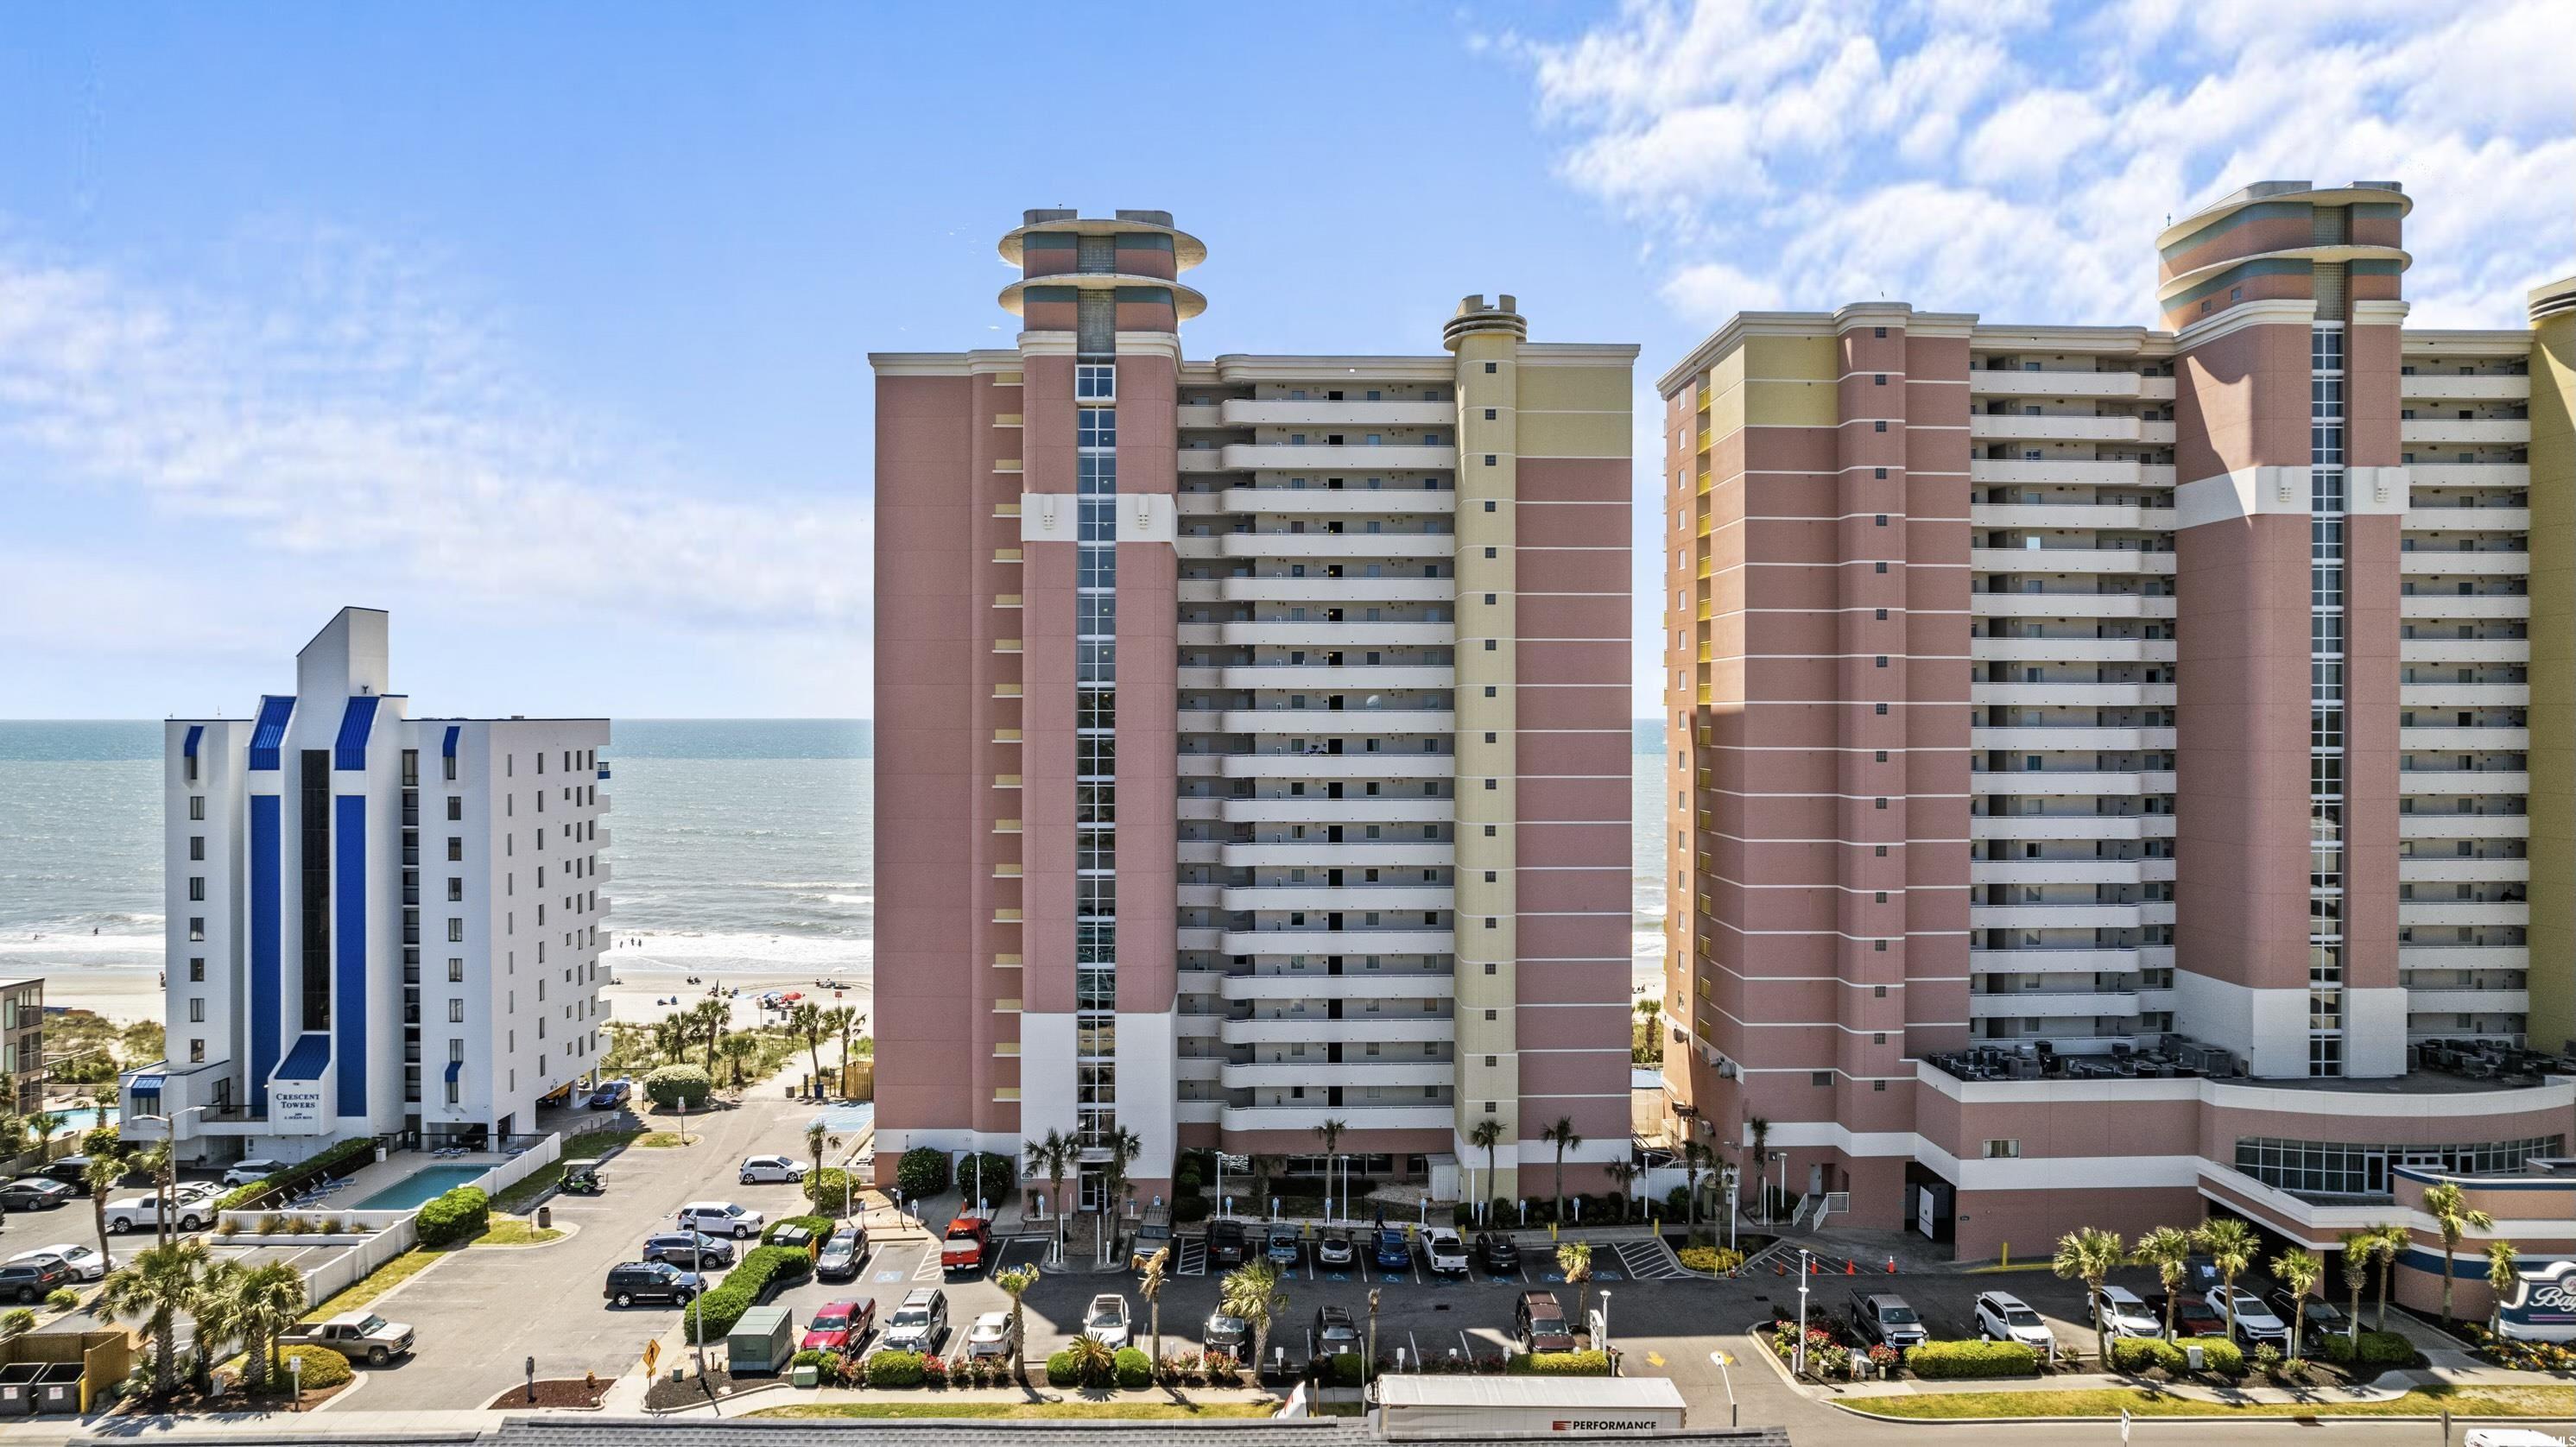 you won't want to miss out on this stunning 2br, 2ba corner unit at bay watch resort in north myrtle beach! this oceanfront unit is located on the 18th floor and was completely renovated in 2021 and 2022 with gorgeous updates throughout including a new hvac system, new flooring, granite countertops, stainless steel appliances, new furnishings, and so much more! unit 1802 is situated in the north tower and offers picturesque views of the sunrise each morning. the primary bedroom offers ocean views and access to the large balcony. the secondary bedroom has a private balcony and offers lots of natural light. bay watch offers spectacular amenities including 18 pools and hot tubs, 3 beach accesses, an on-site restaurant, snack bar by the pool, bar, and so much more. situated in the heart of north myrtle beach, bay watch resort is close to barefoot resort, main street, the town of north myrtle beach, many golf courses, and lots of shopping. this is a rental machine with 4 years of consistent rental income. schedule your showing before this one is off the market!